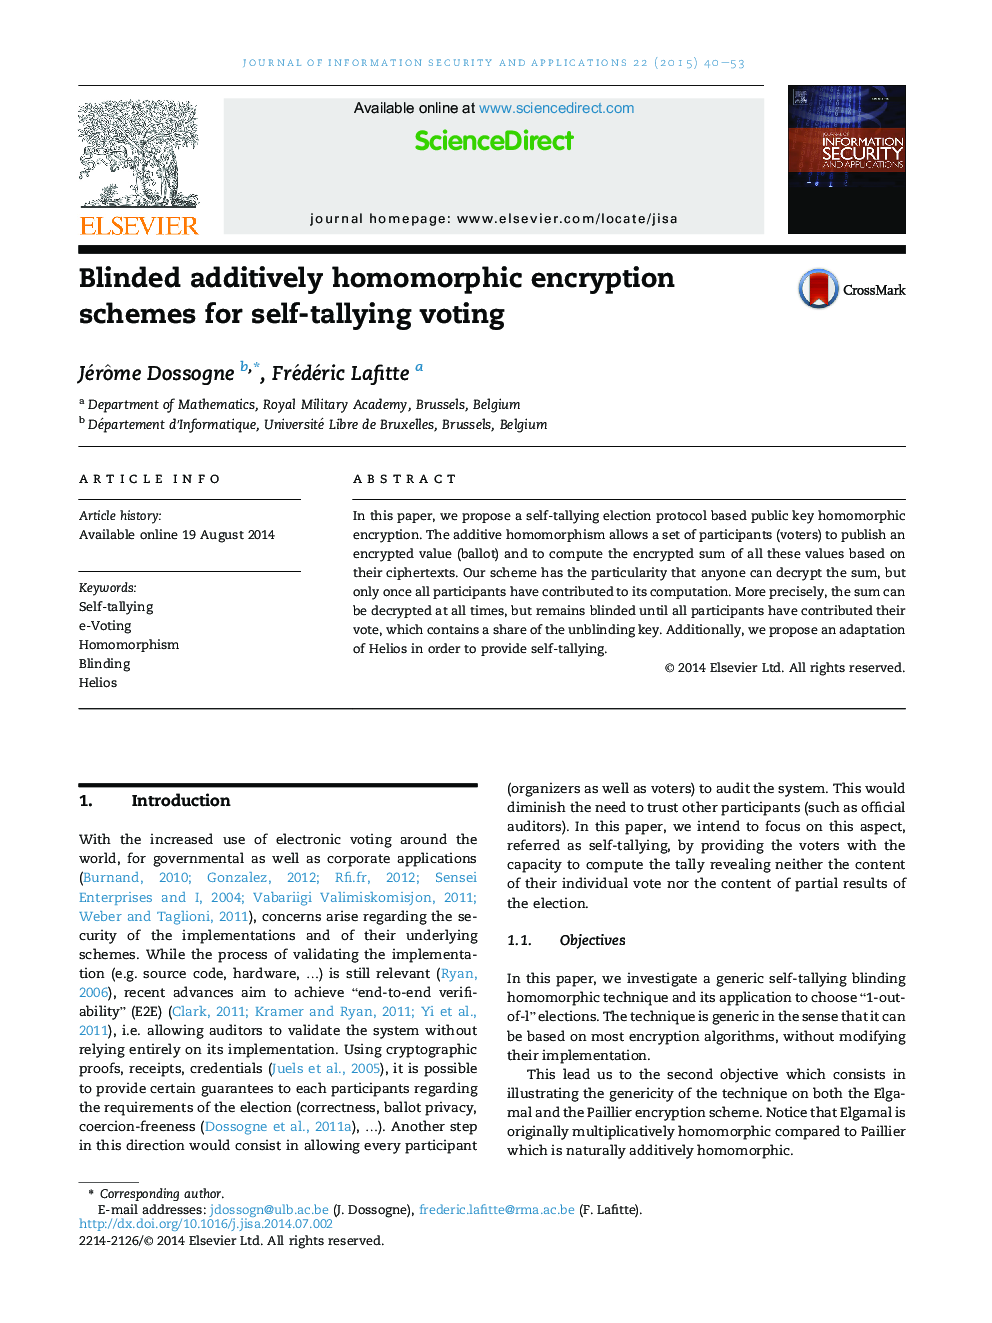 Blinded additively homomorphic encryption schemes for self-tallying voting